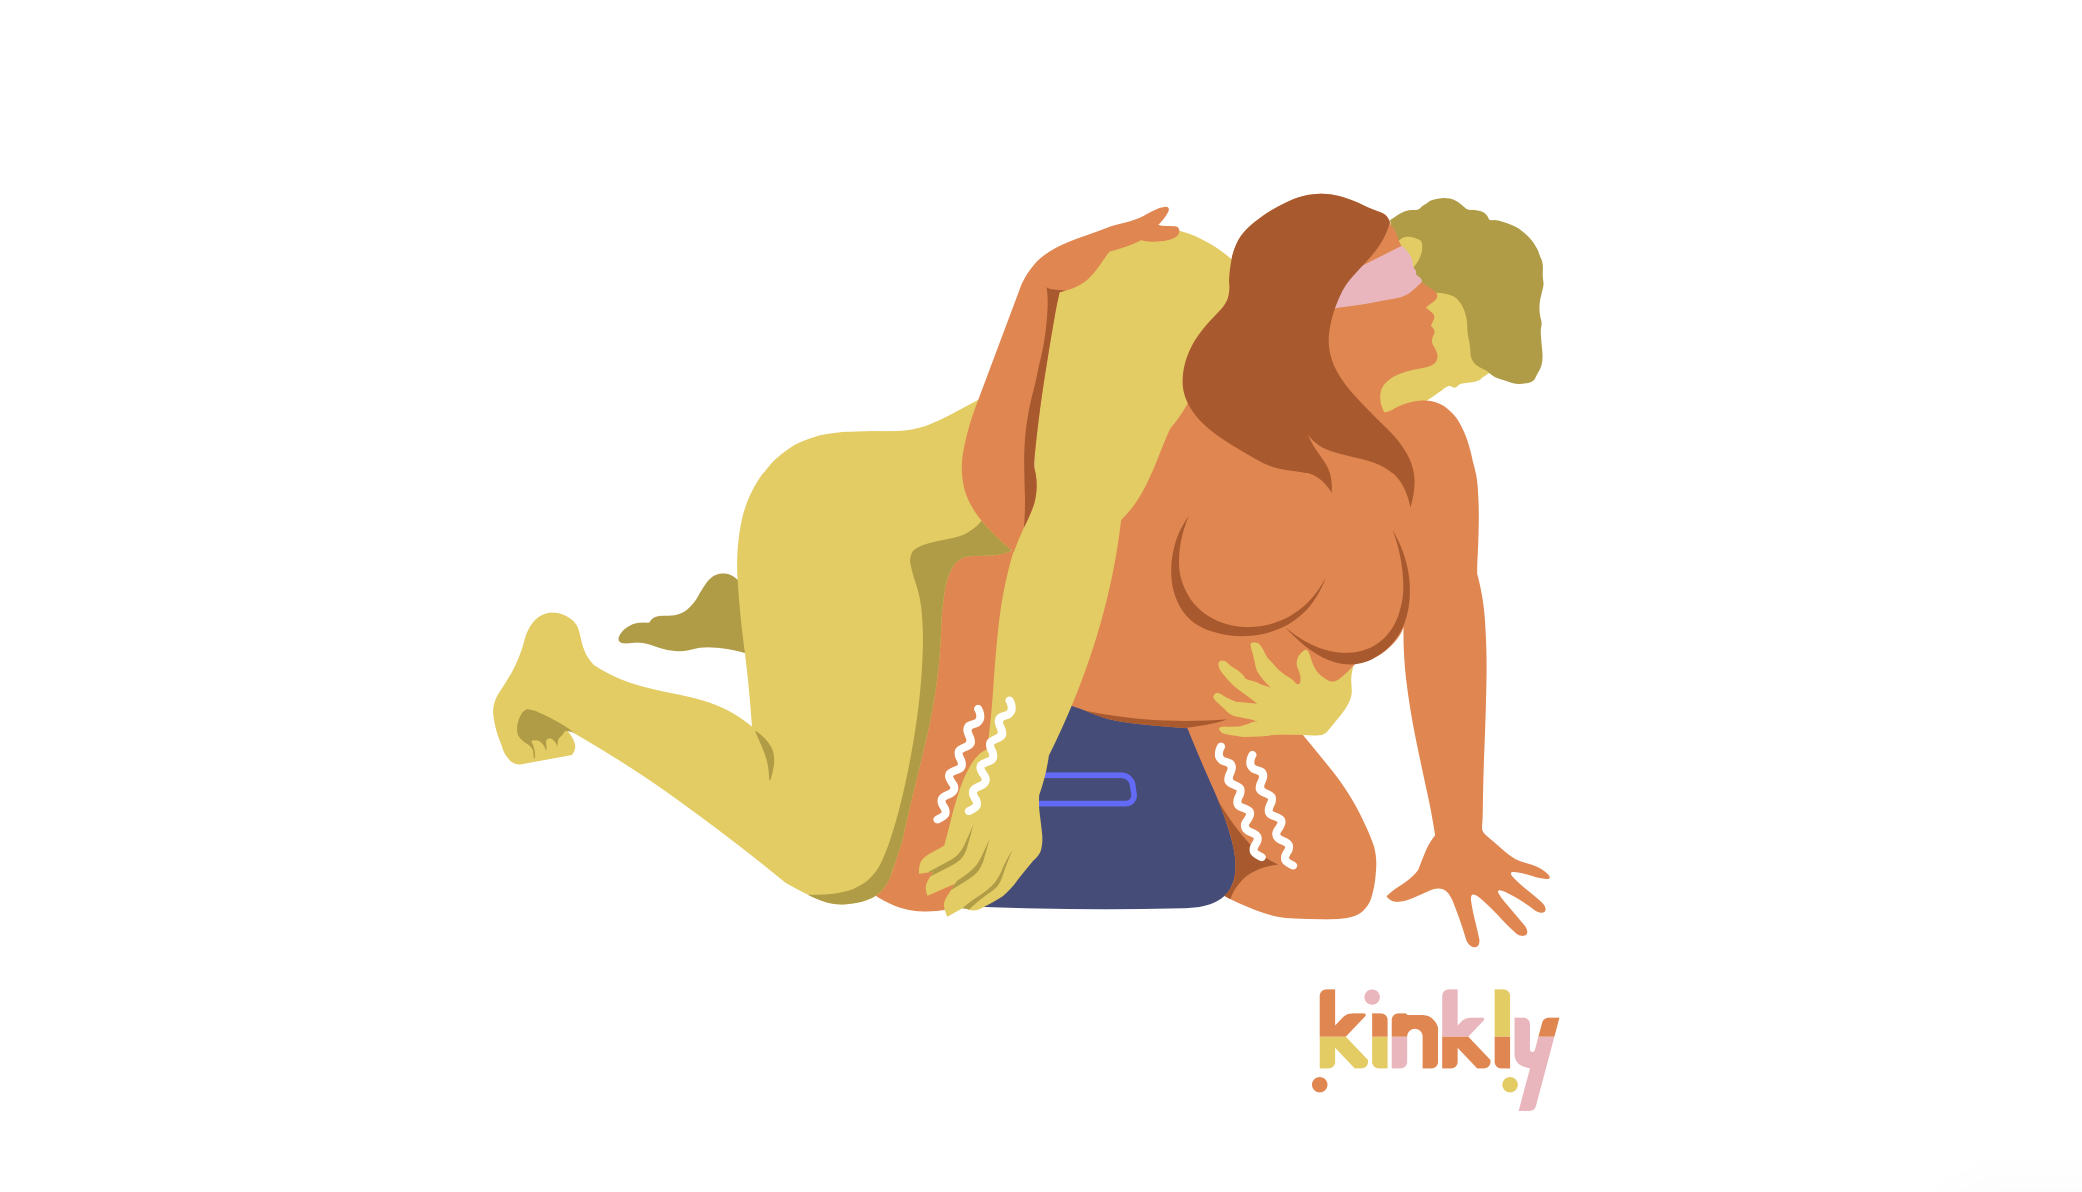 Illustrated sex position. The receiving partner is on all fours on the ground. They are straddling the Cowgirl sex machine for pleasurable stimulation. Their partner is on all fours behind them, leaning overtop of their back in order to penetrate.